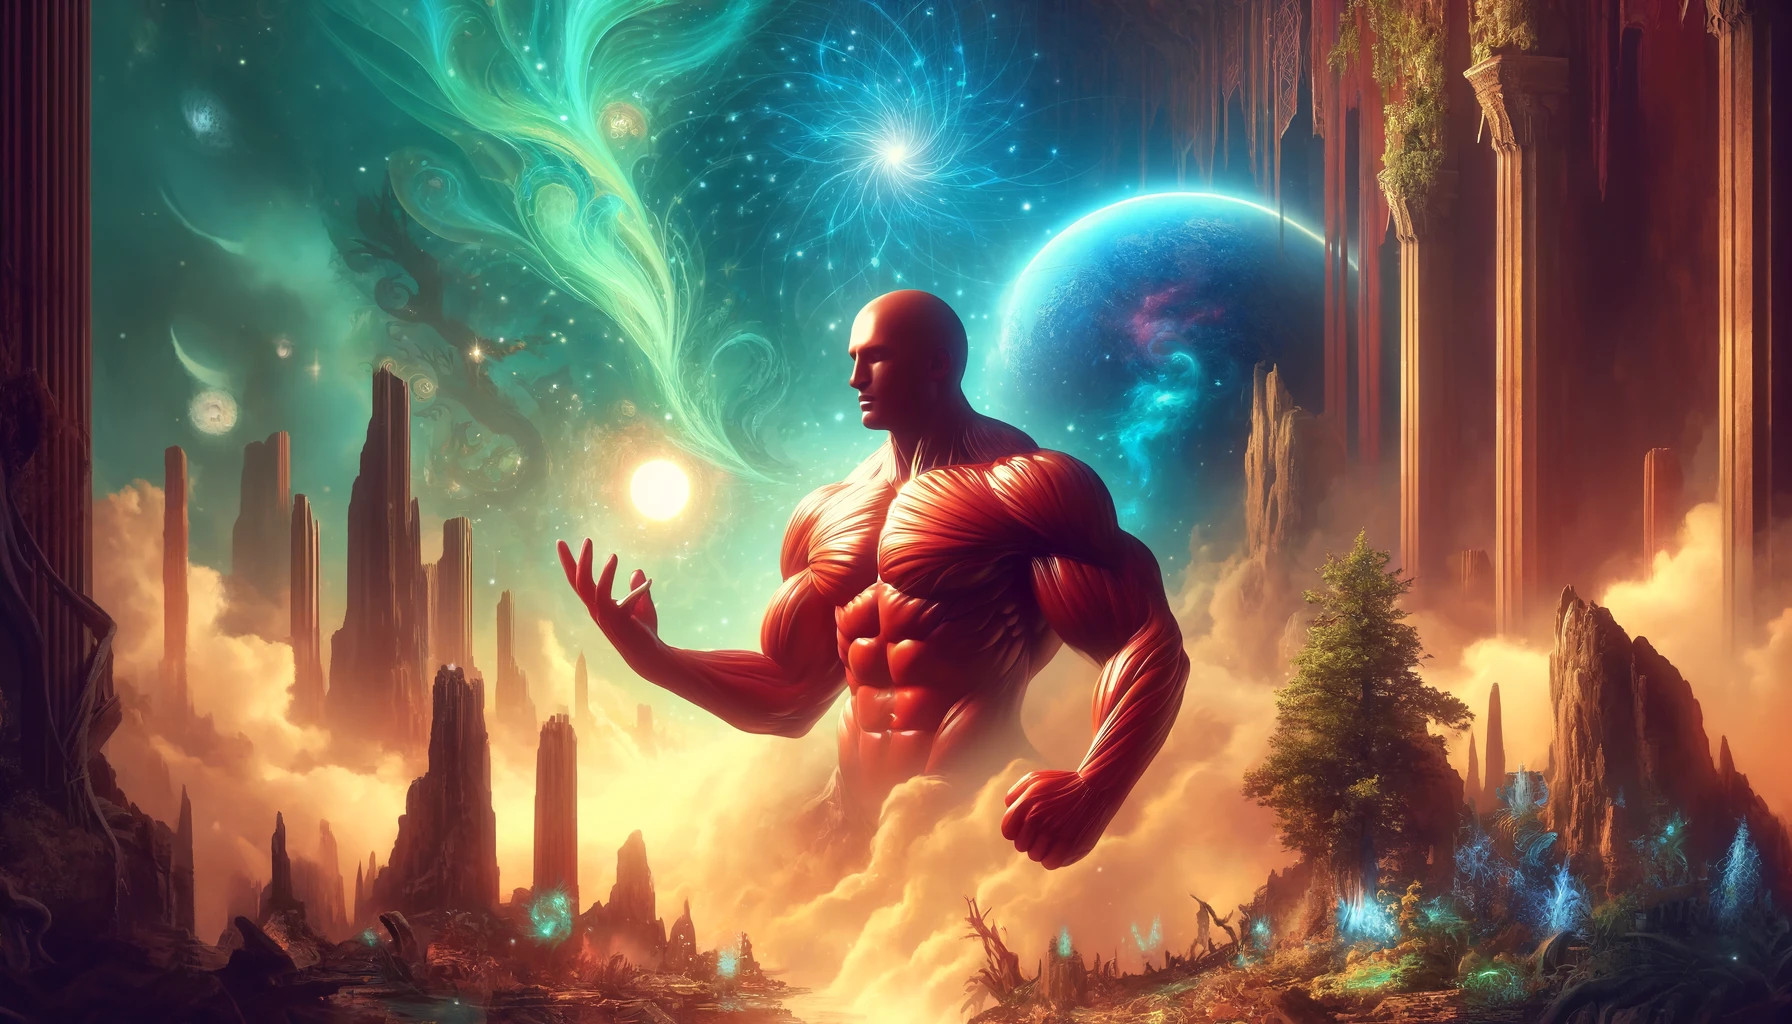 A red muscular giant stands amidst a fantastical landscape, magic at his fingertips and celestial bodies illuminating the sky.